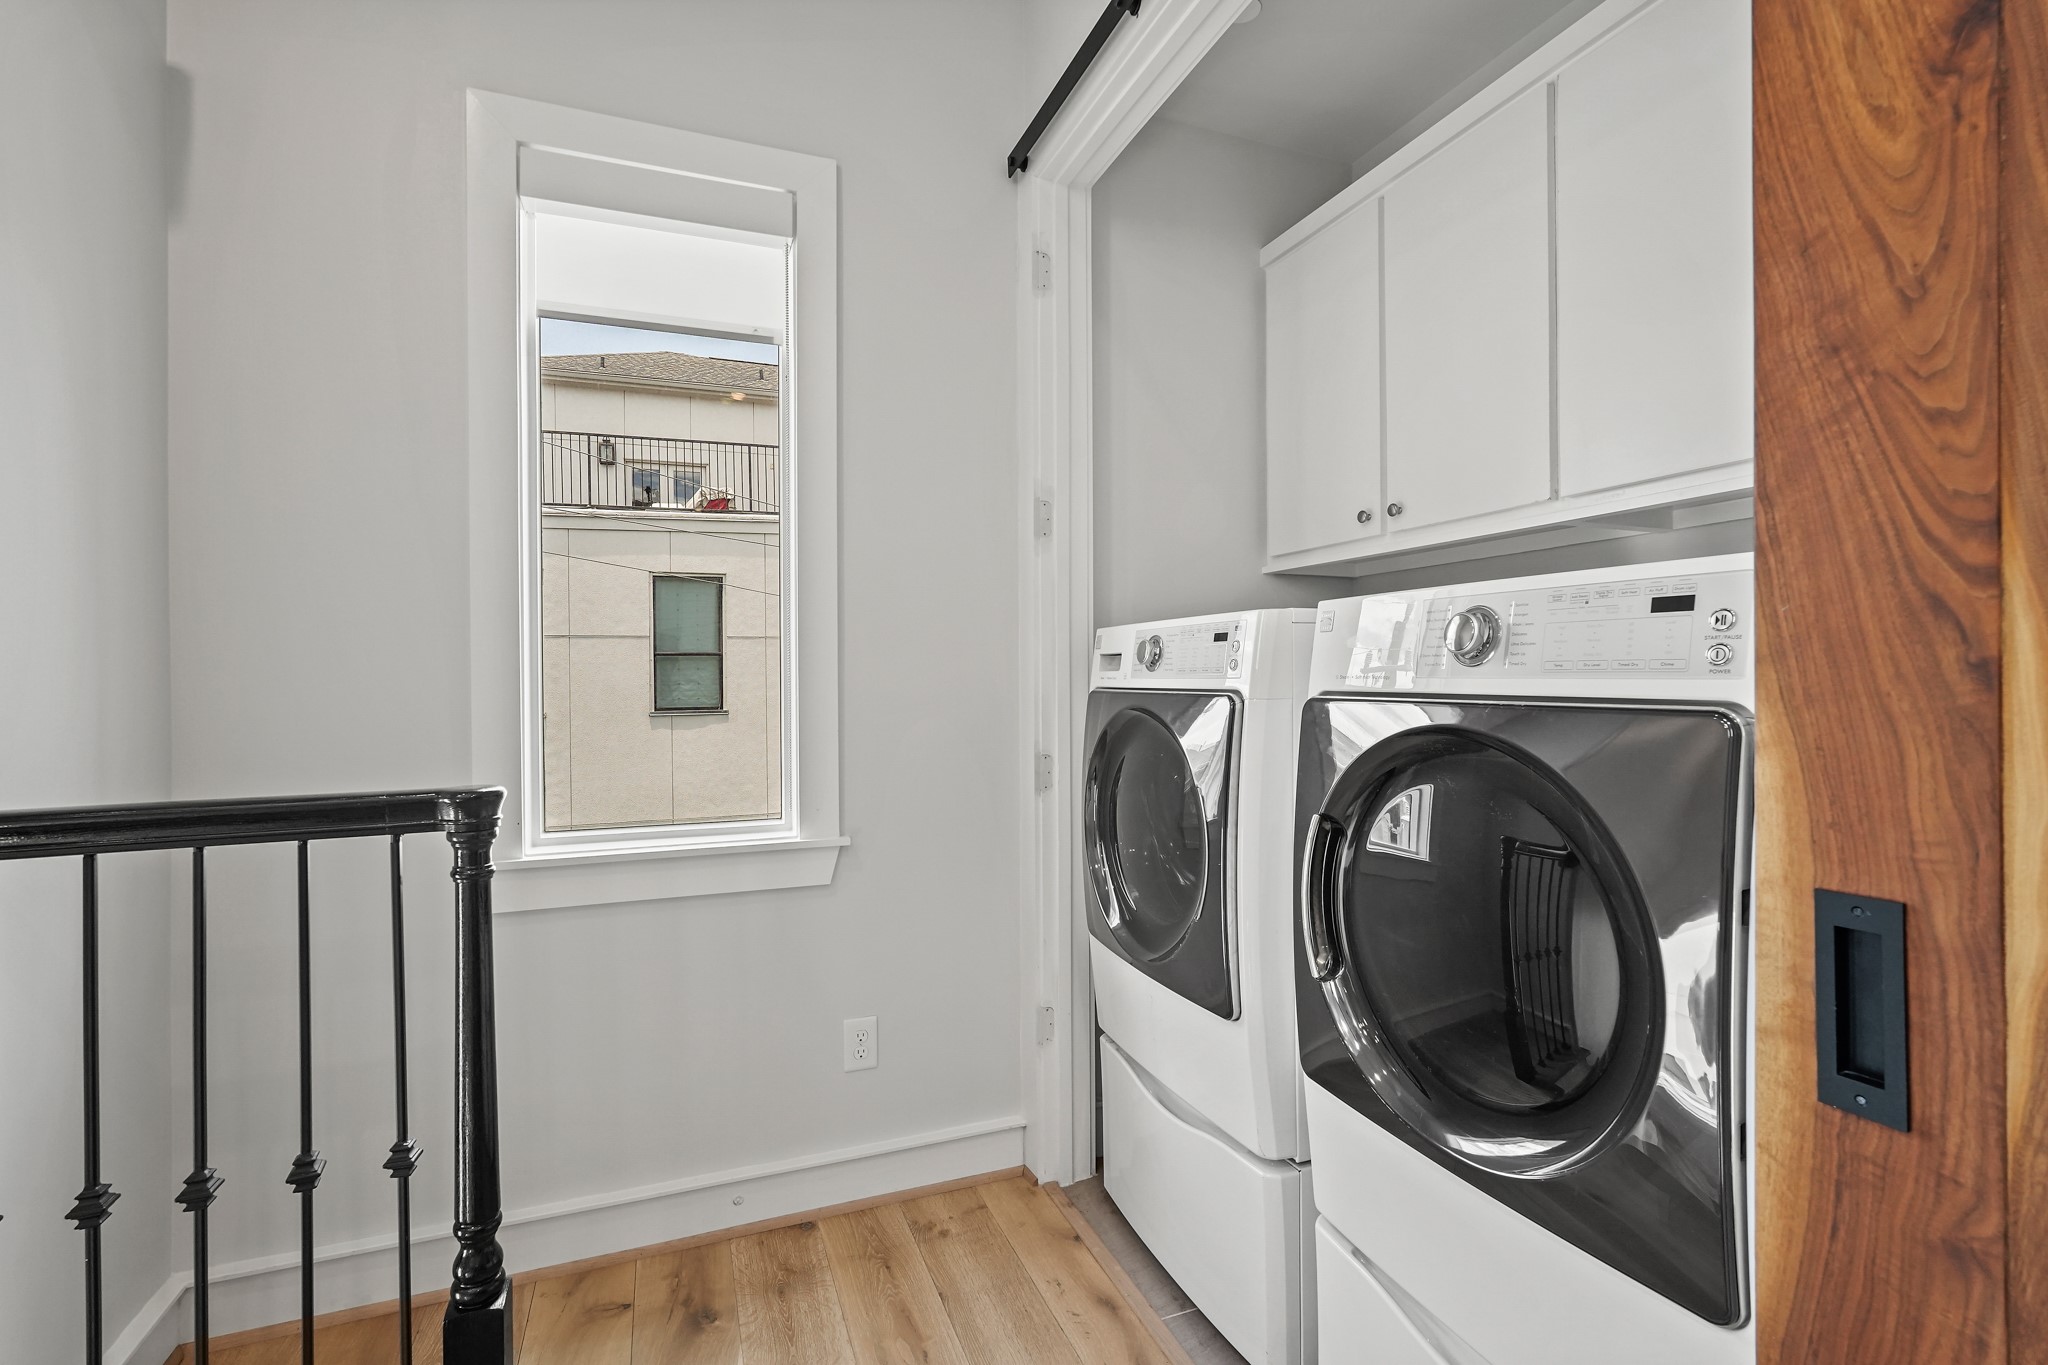 Built In Cabinets Above your Washer and Dryer Provide Extra Storage, w/ the Ability to Conceal Your Utility Room Behind a Warm, Solid Wood, Barn Door